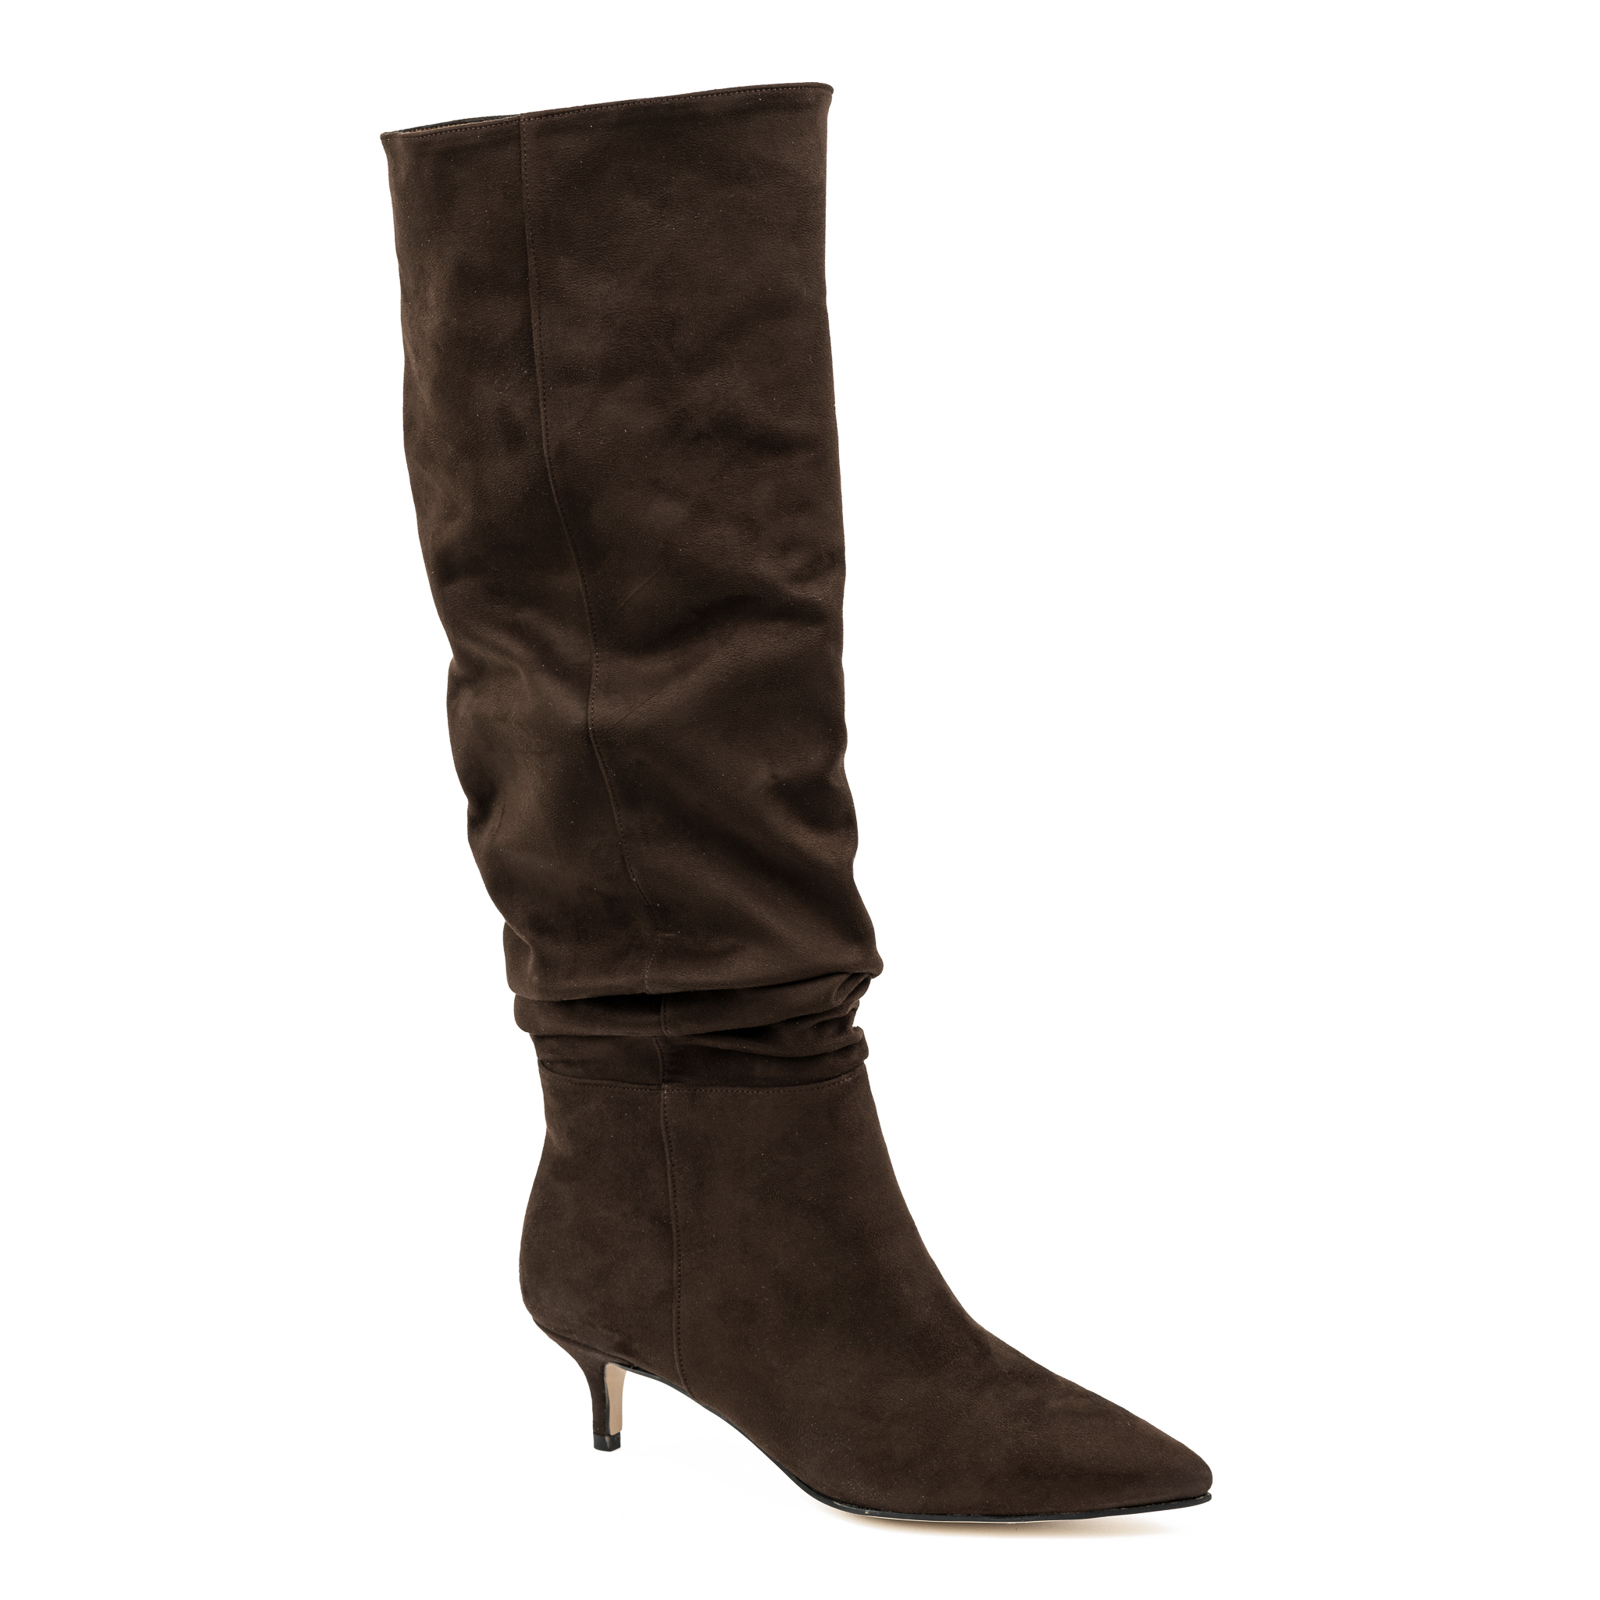 VELOUR WRINKLED SPIKE BOOTS WITH THIN HEEL - BROWN